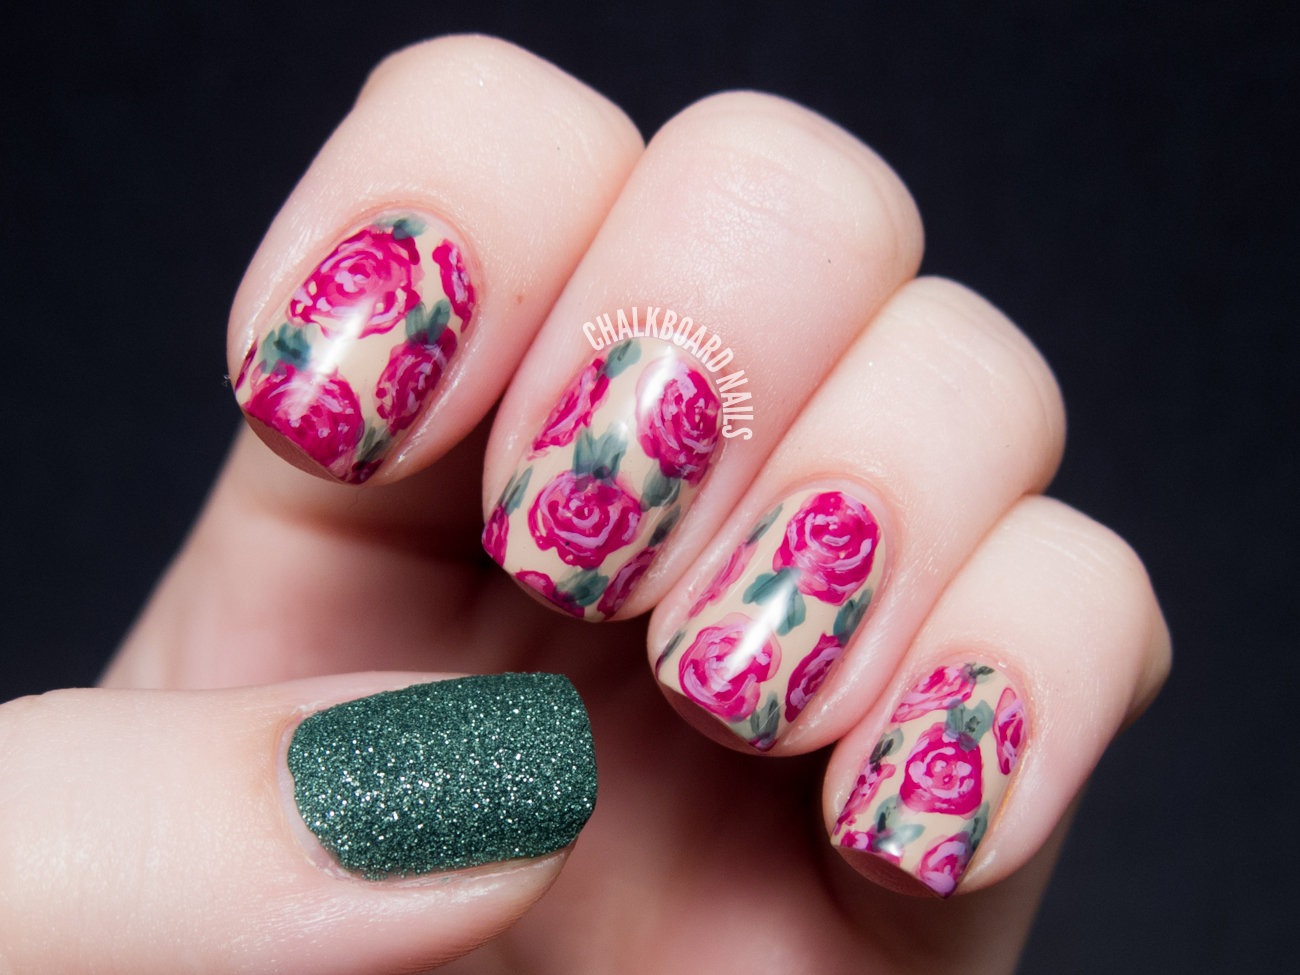 Step by Step Guide to Creating Rose Nail Art - wide 3